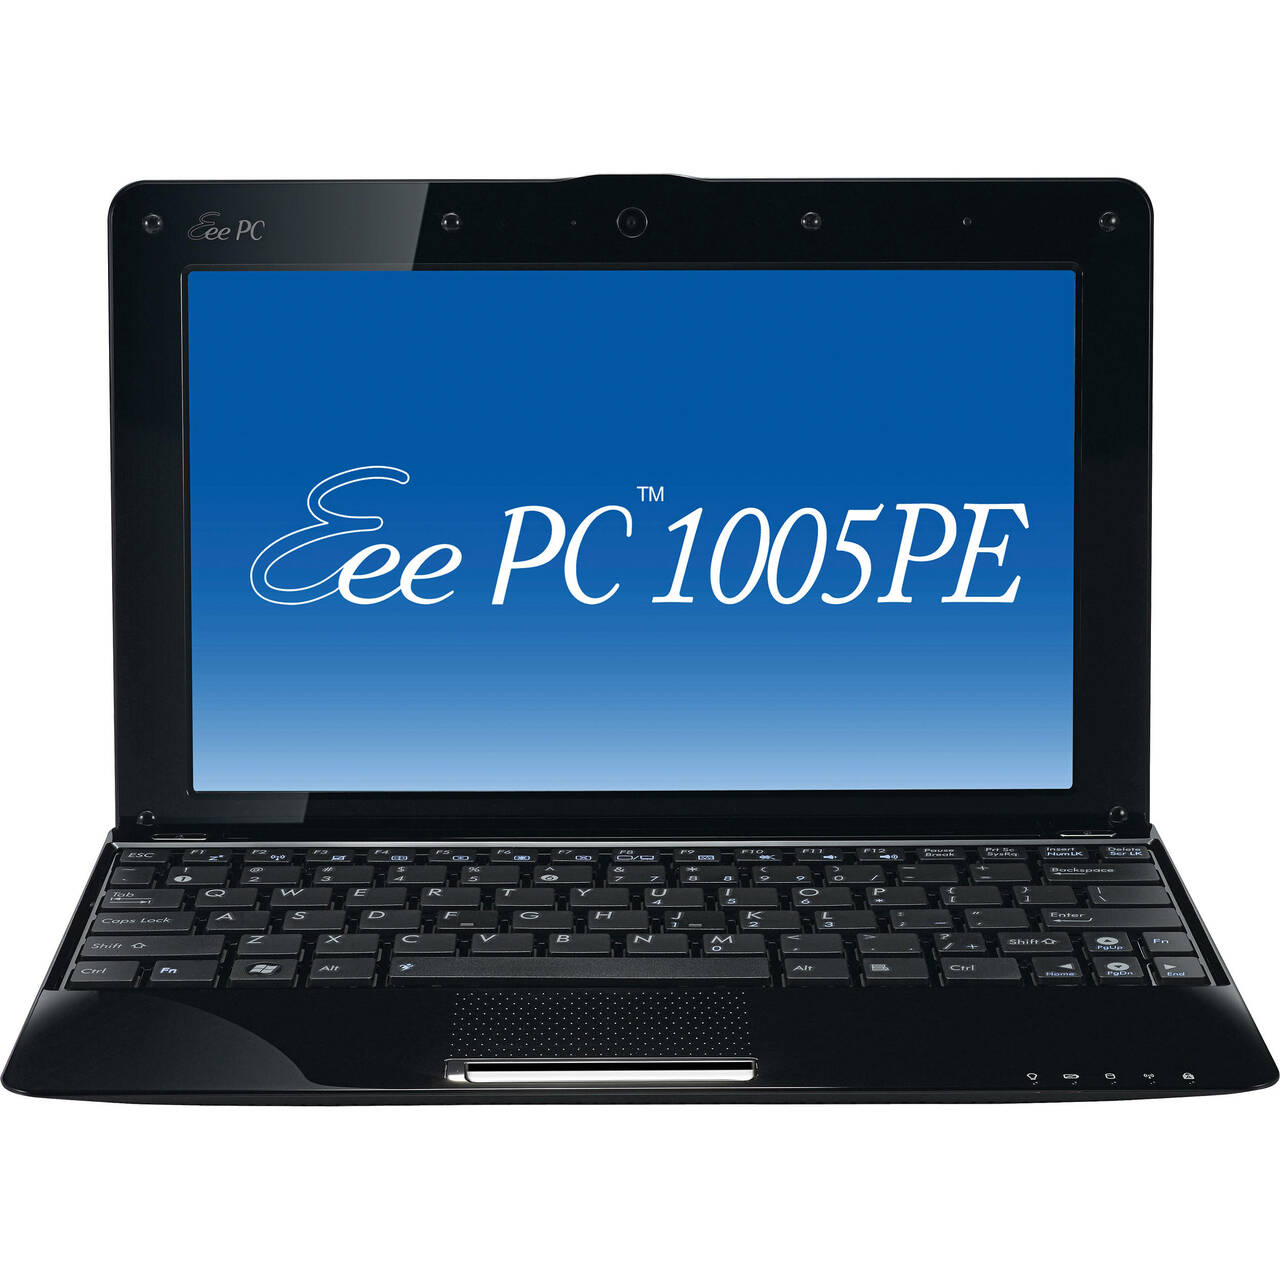 ASUS Eee 1005PE PC Tiny Notebook 2 Units 